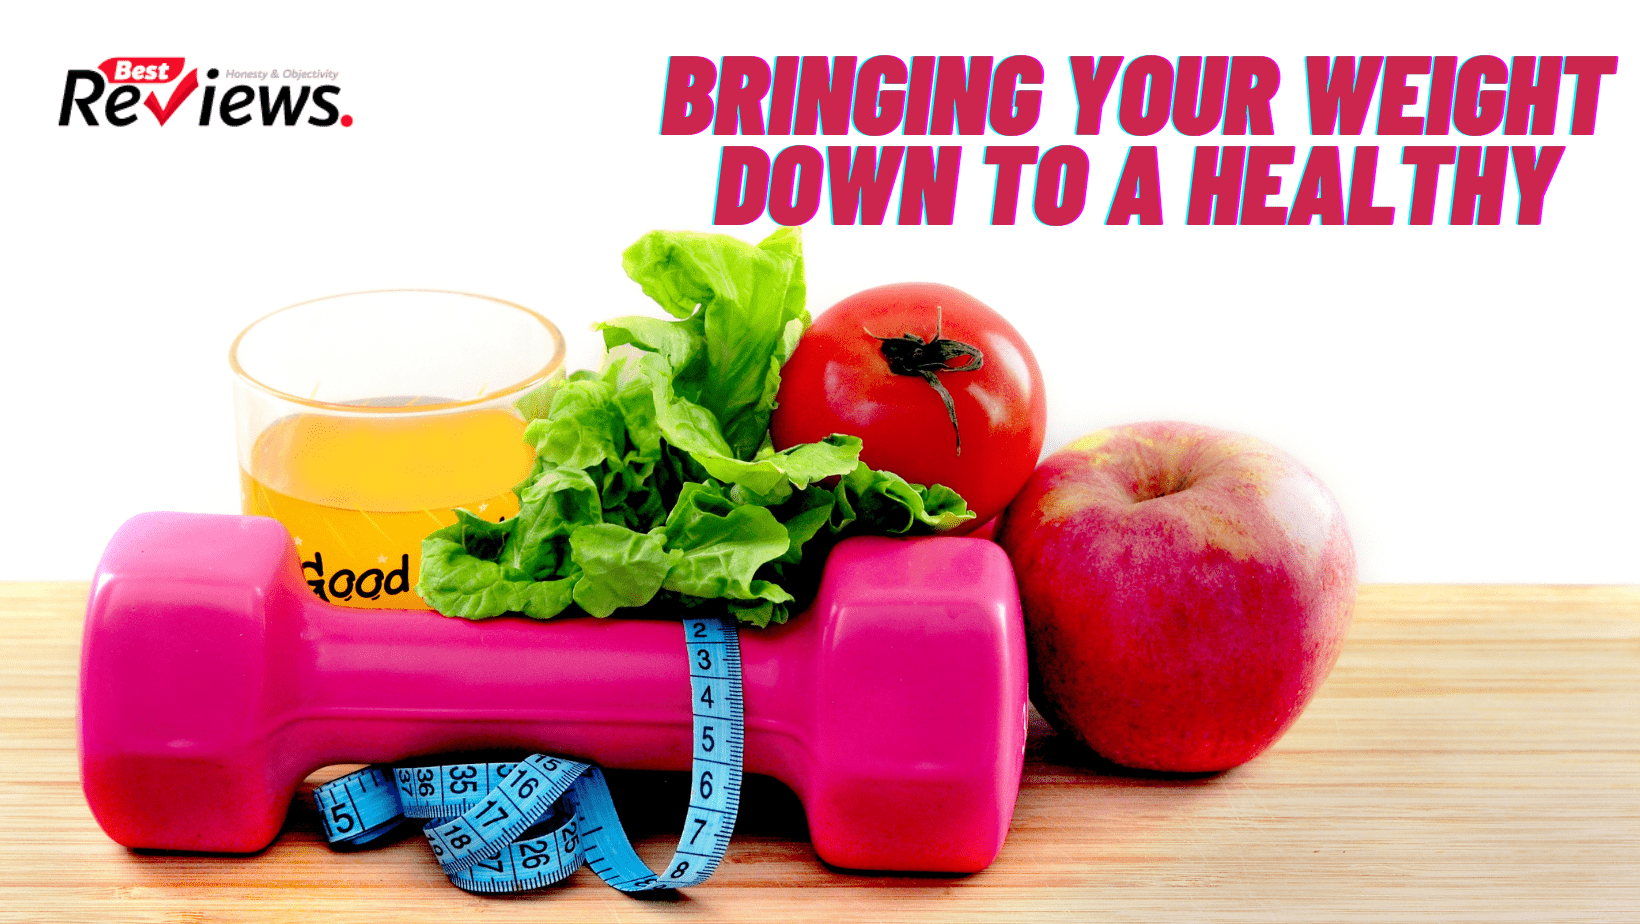 Bringing your weight down to a healthy